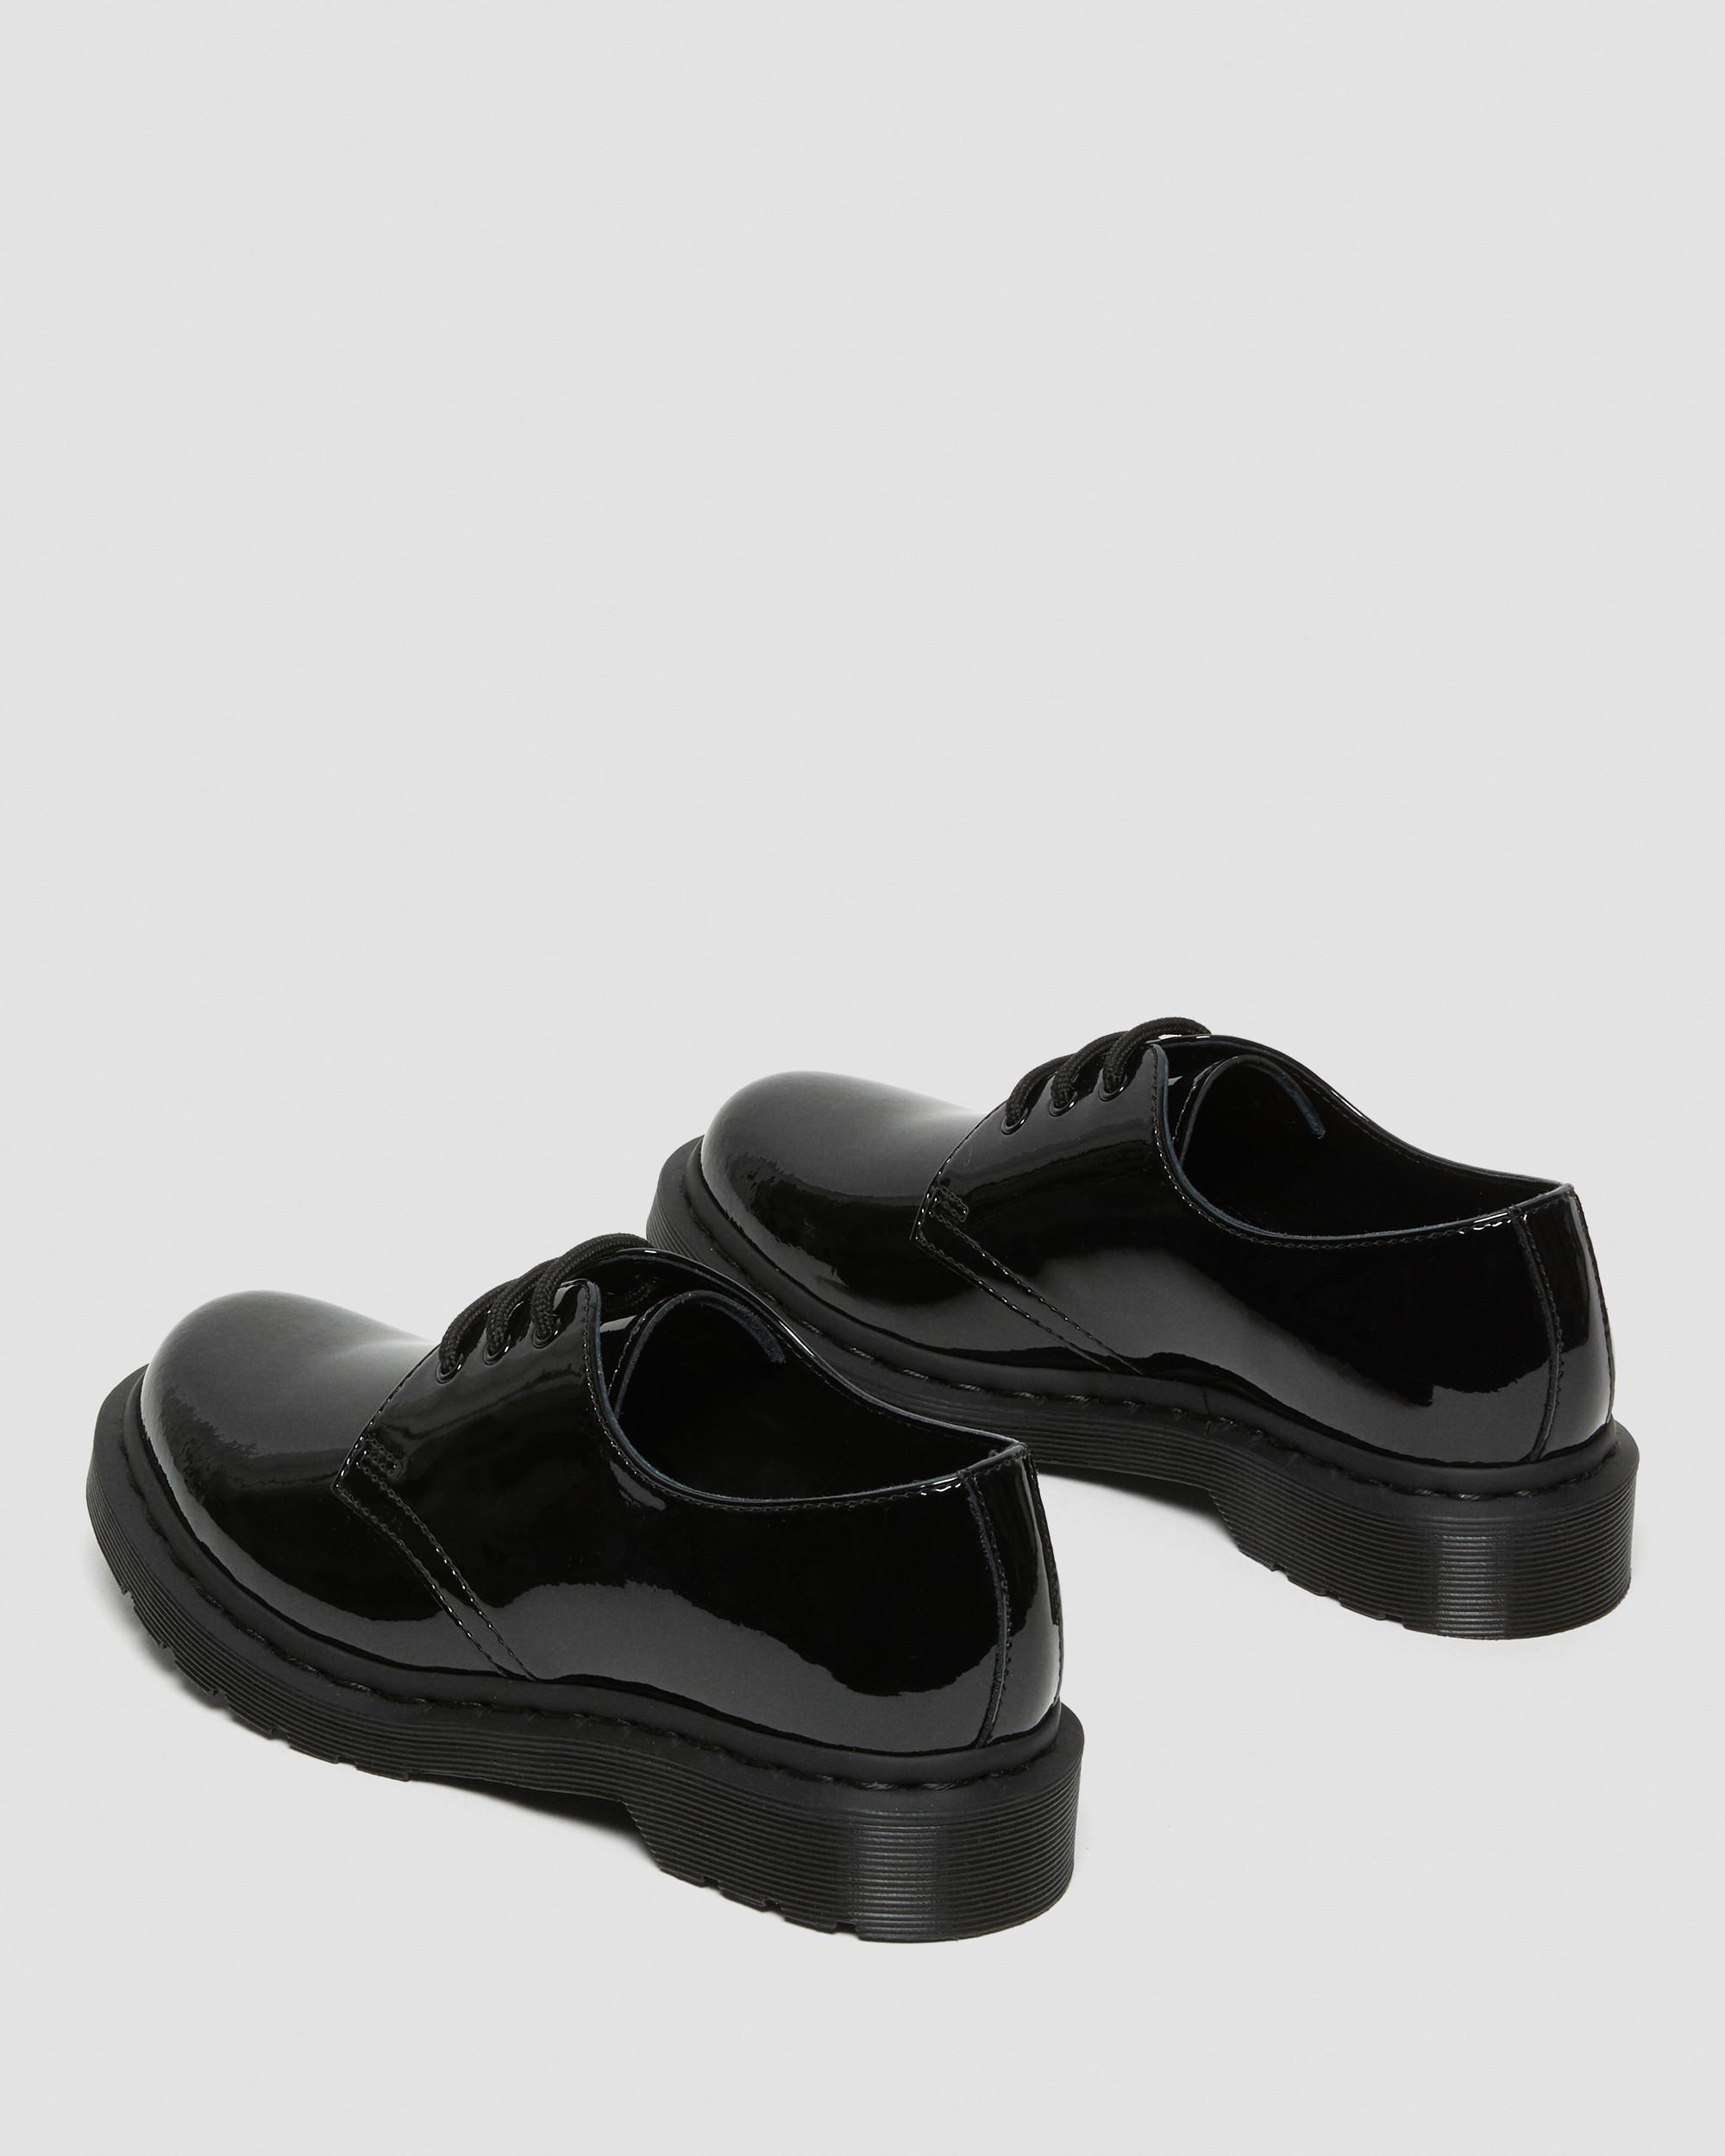 1461 Women's Mono Patent Leather Shoes in Black | Dr. Martens